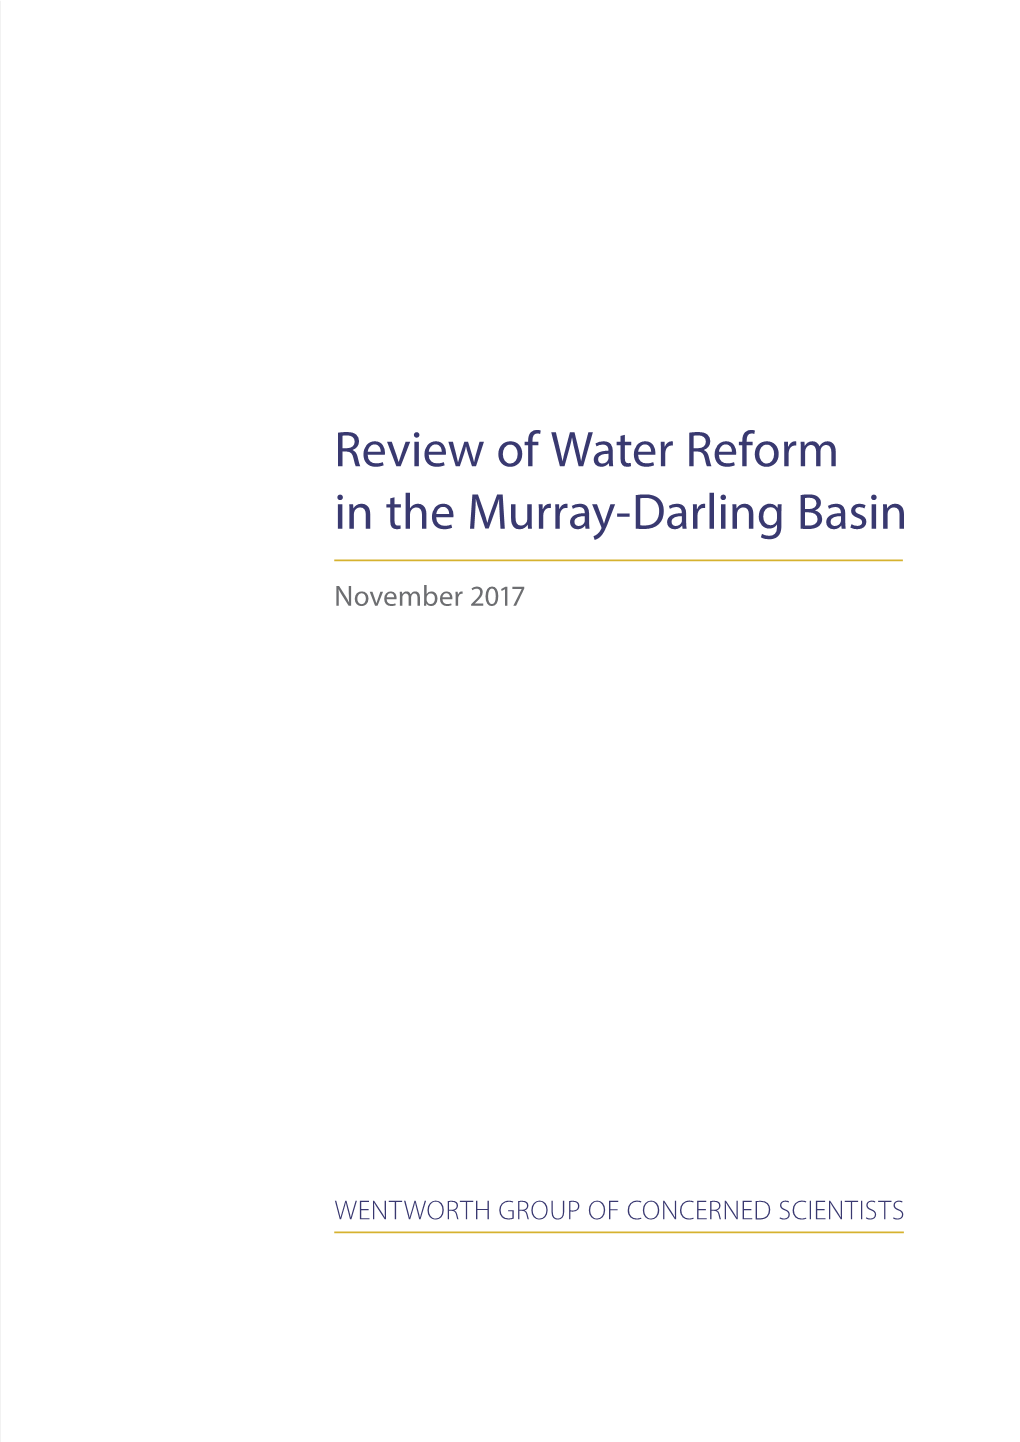 Review of Water Reform in the Murray-Darling Basin